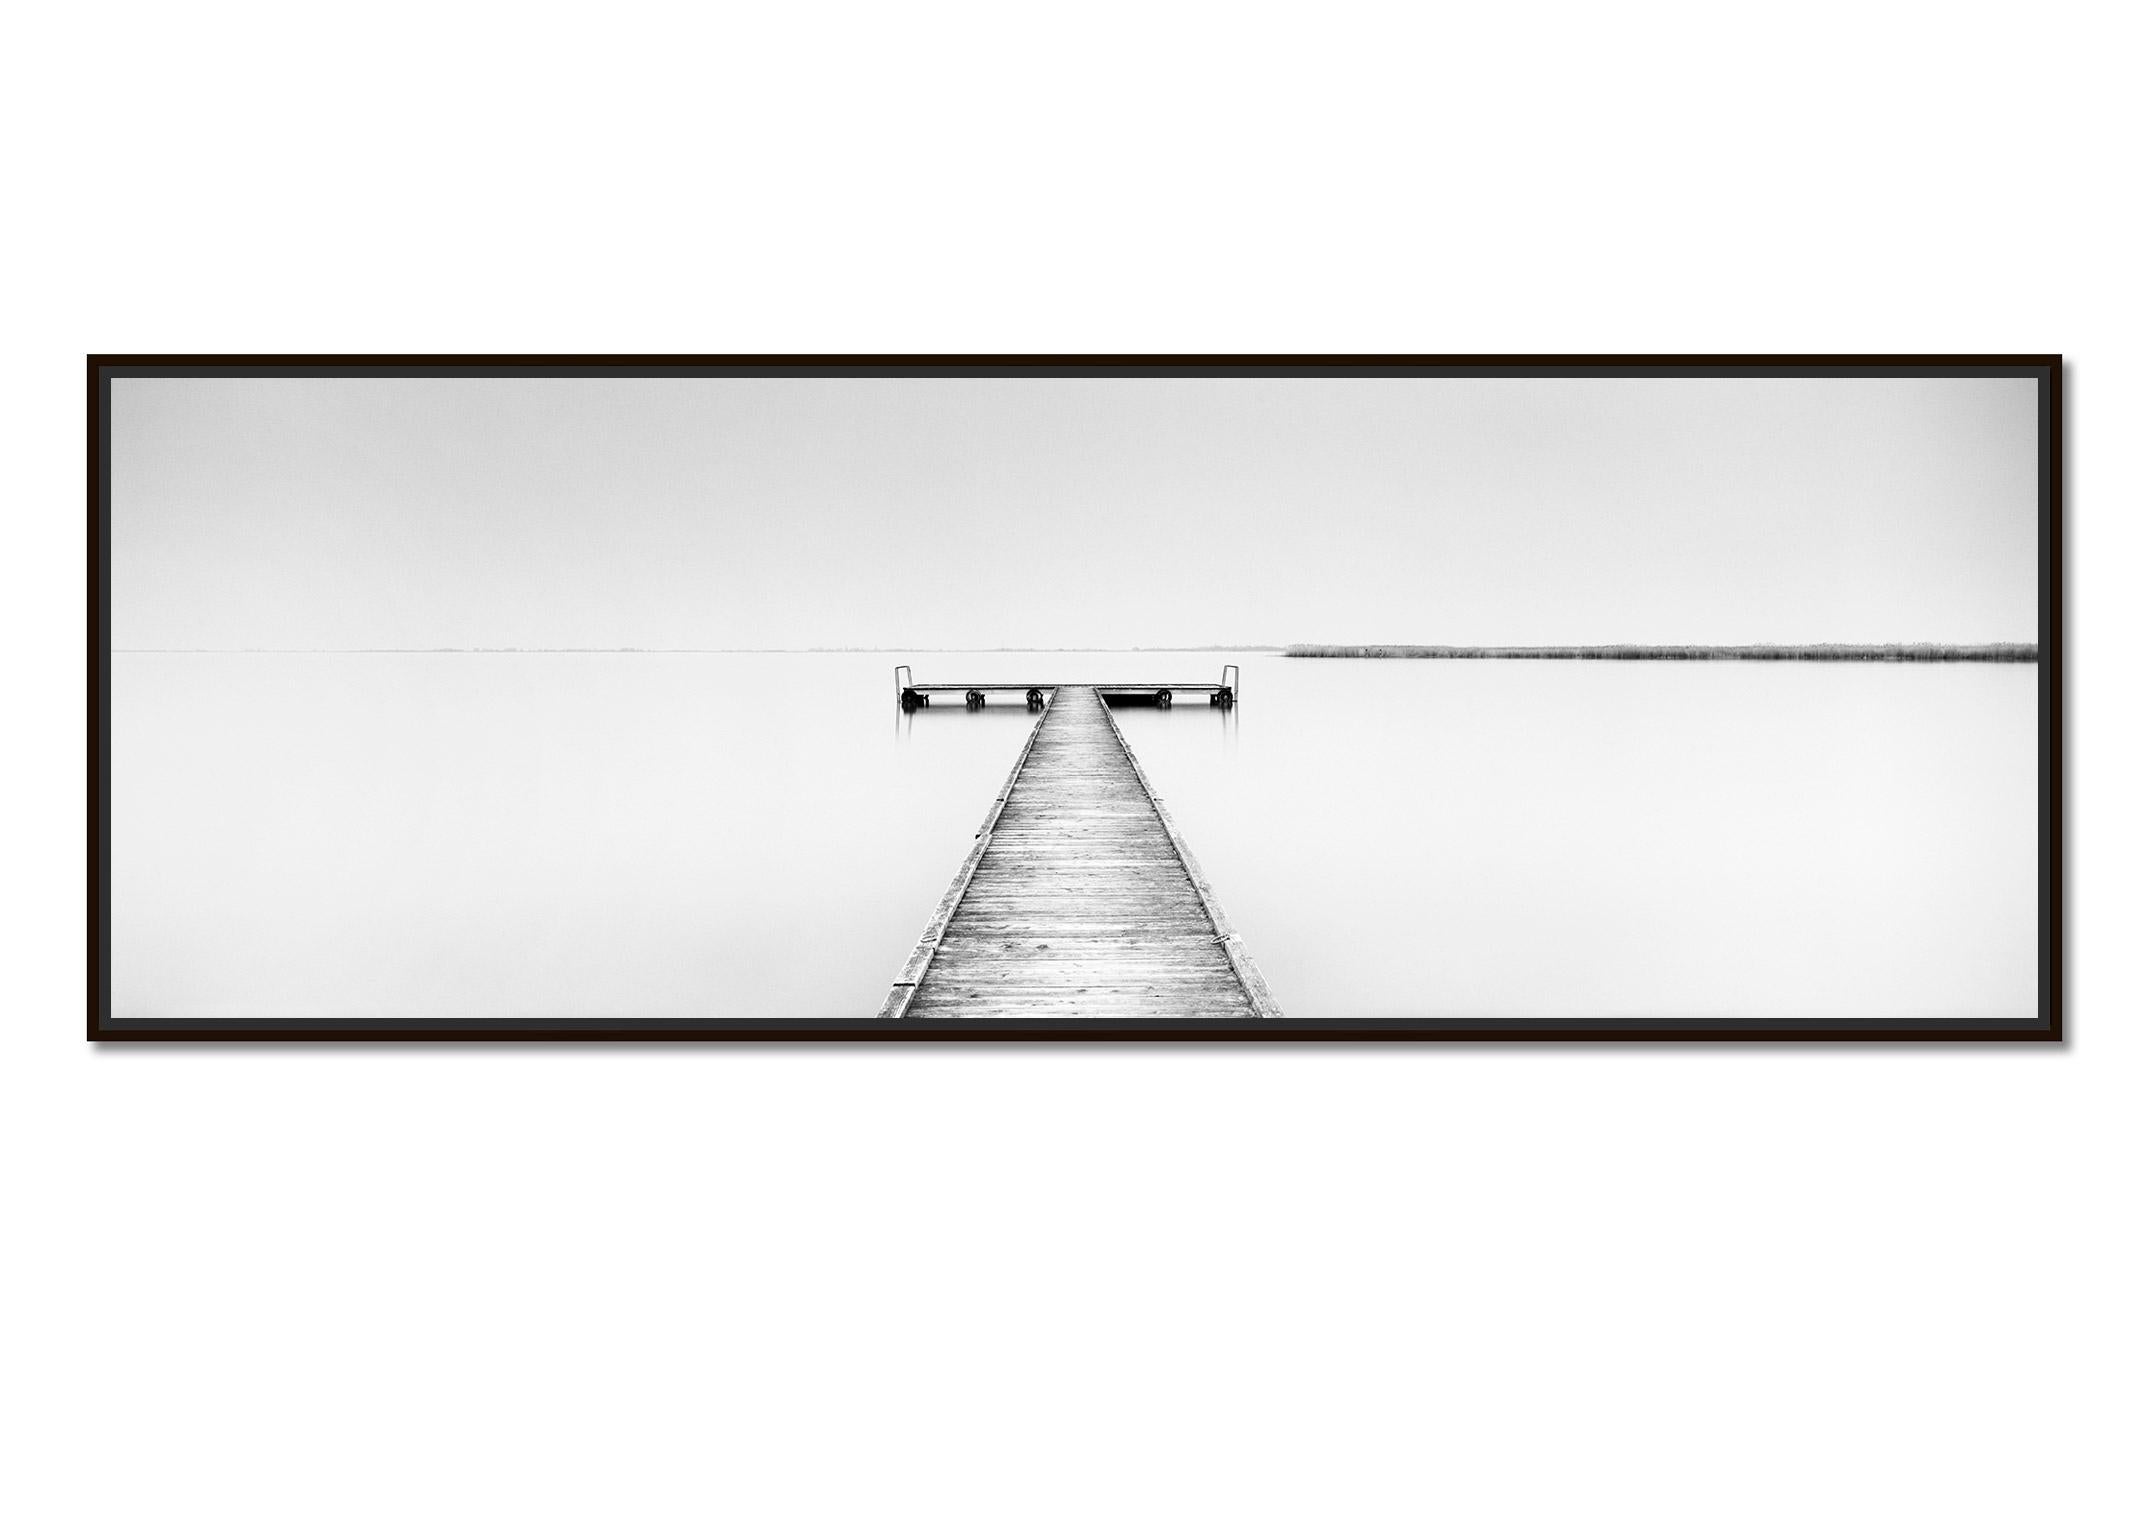 Wood Pier Panorama, minimalist black and white waterscape photography art print - Photograph by Gerald Berghammer